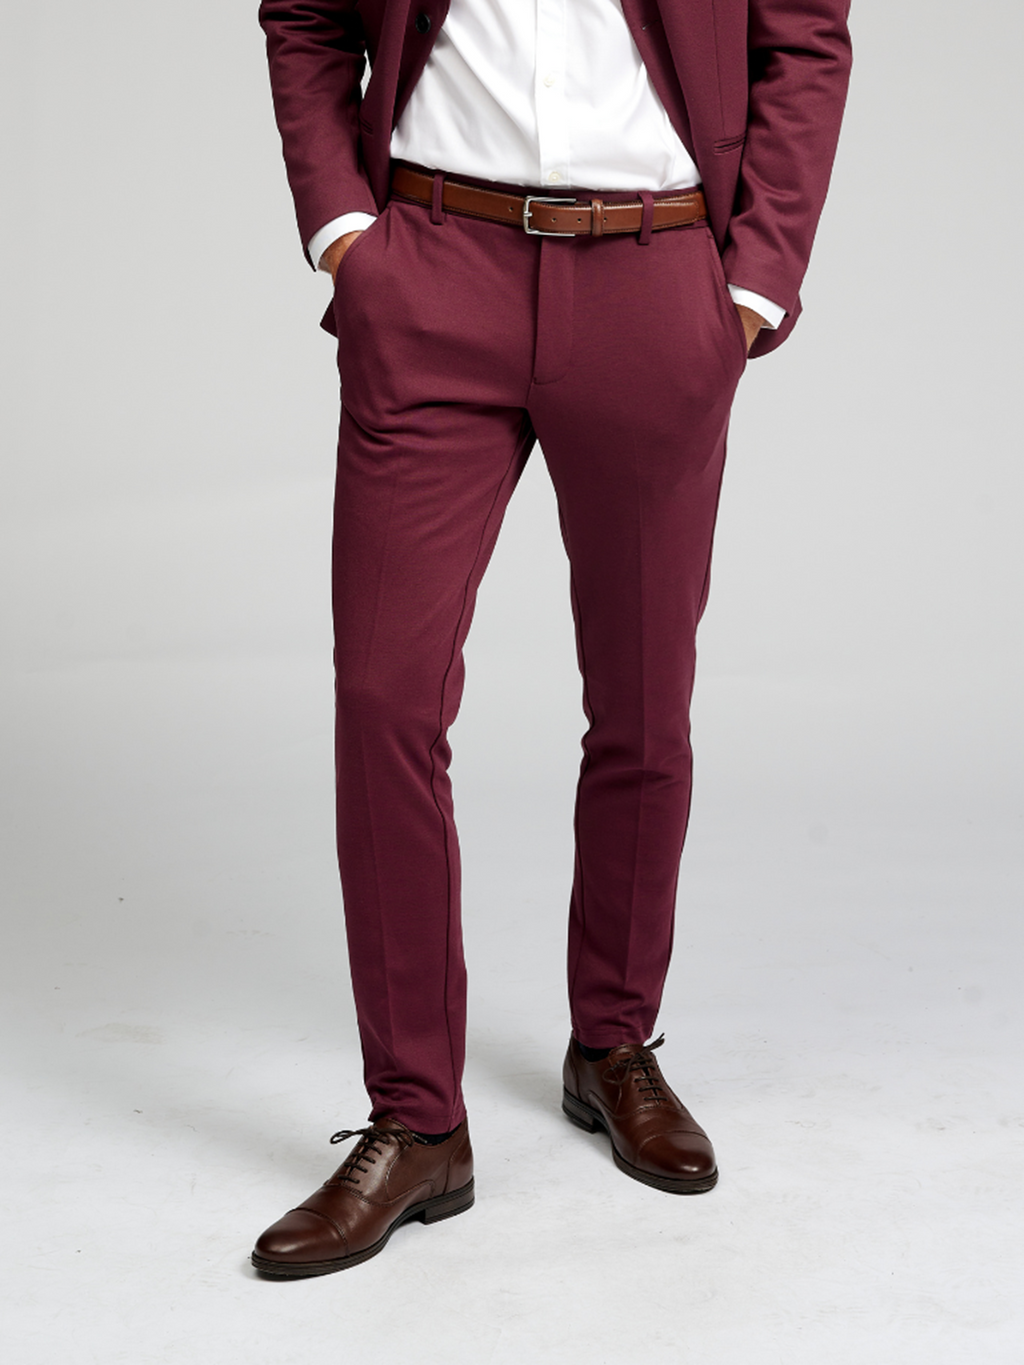 The Original Performance Suit (Burgundy) - Package Deal